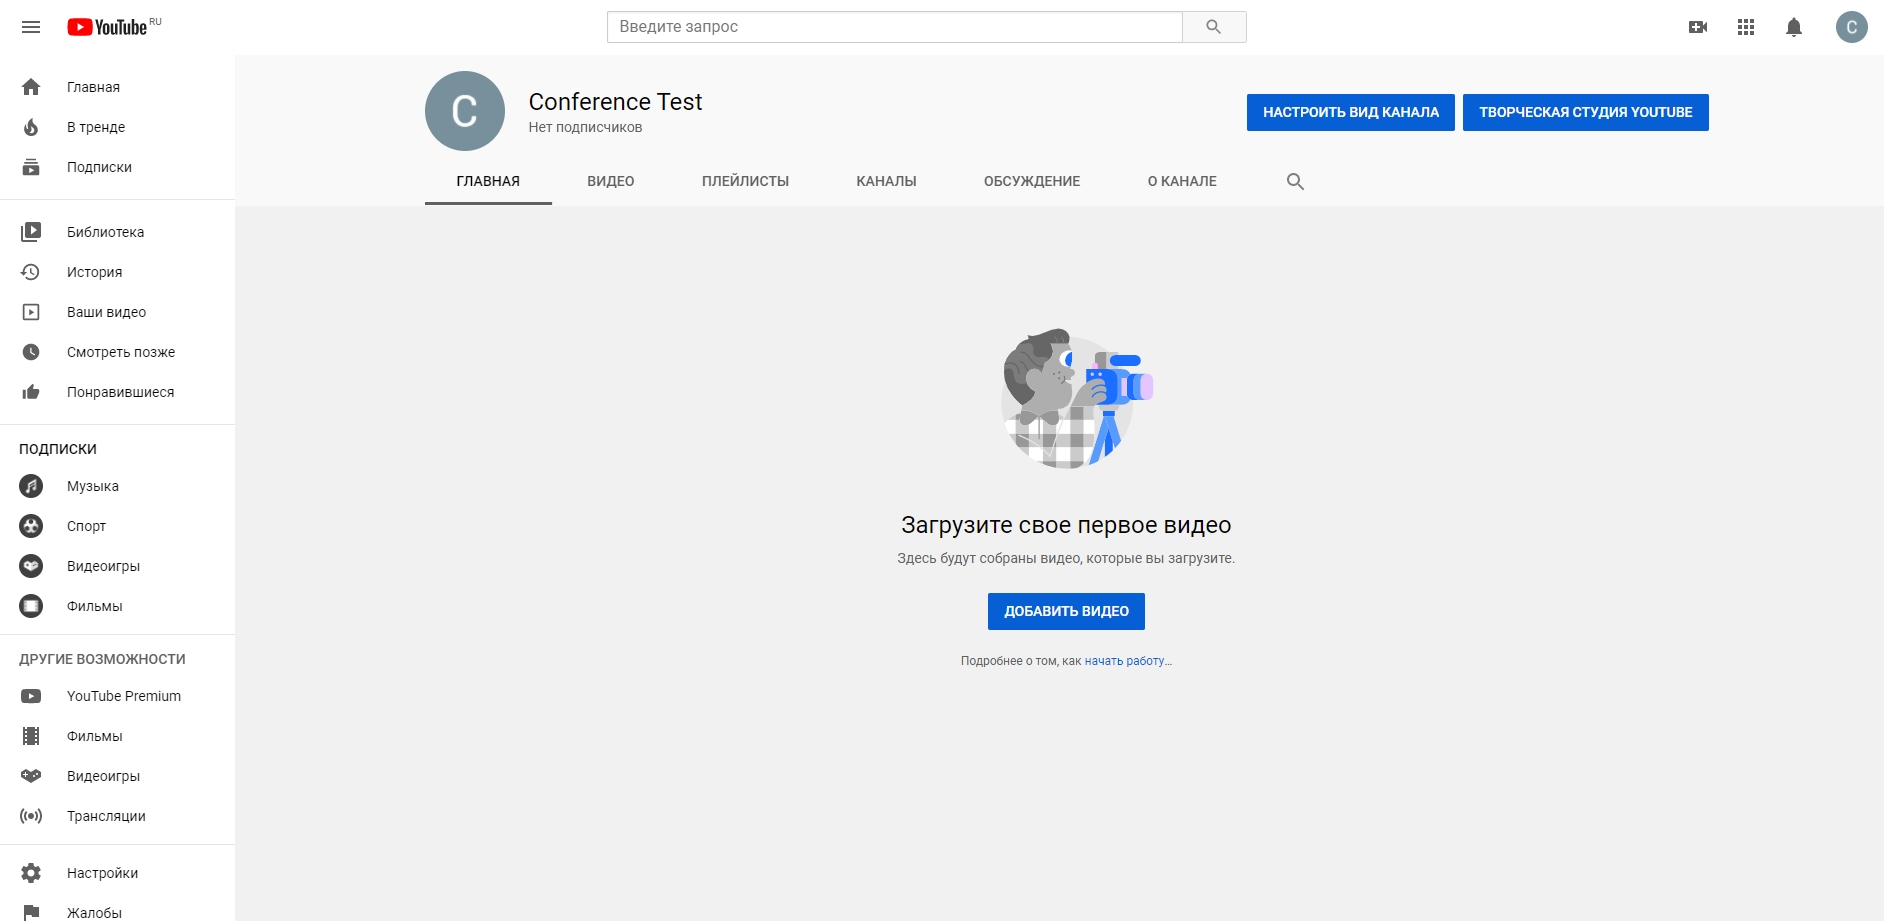 Conference Test - YouTube